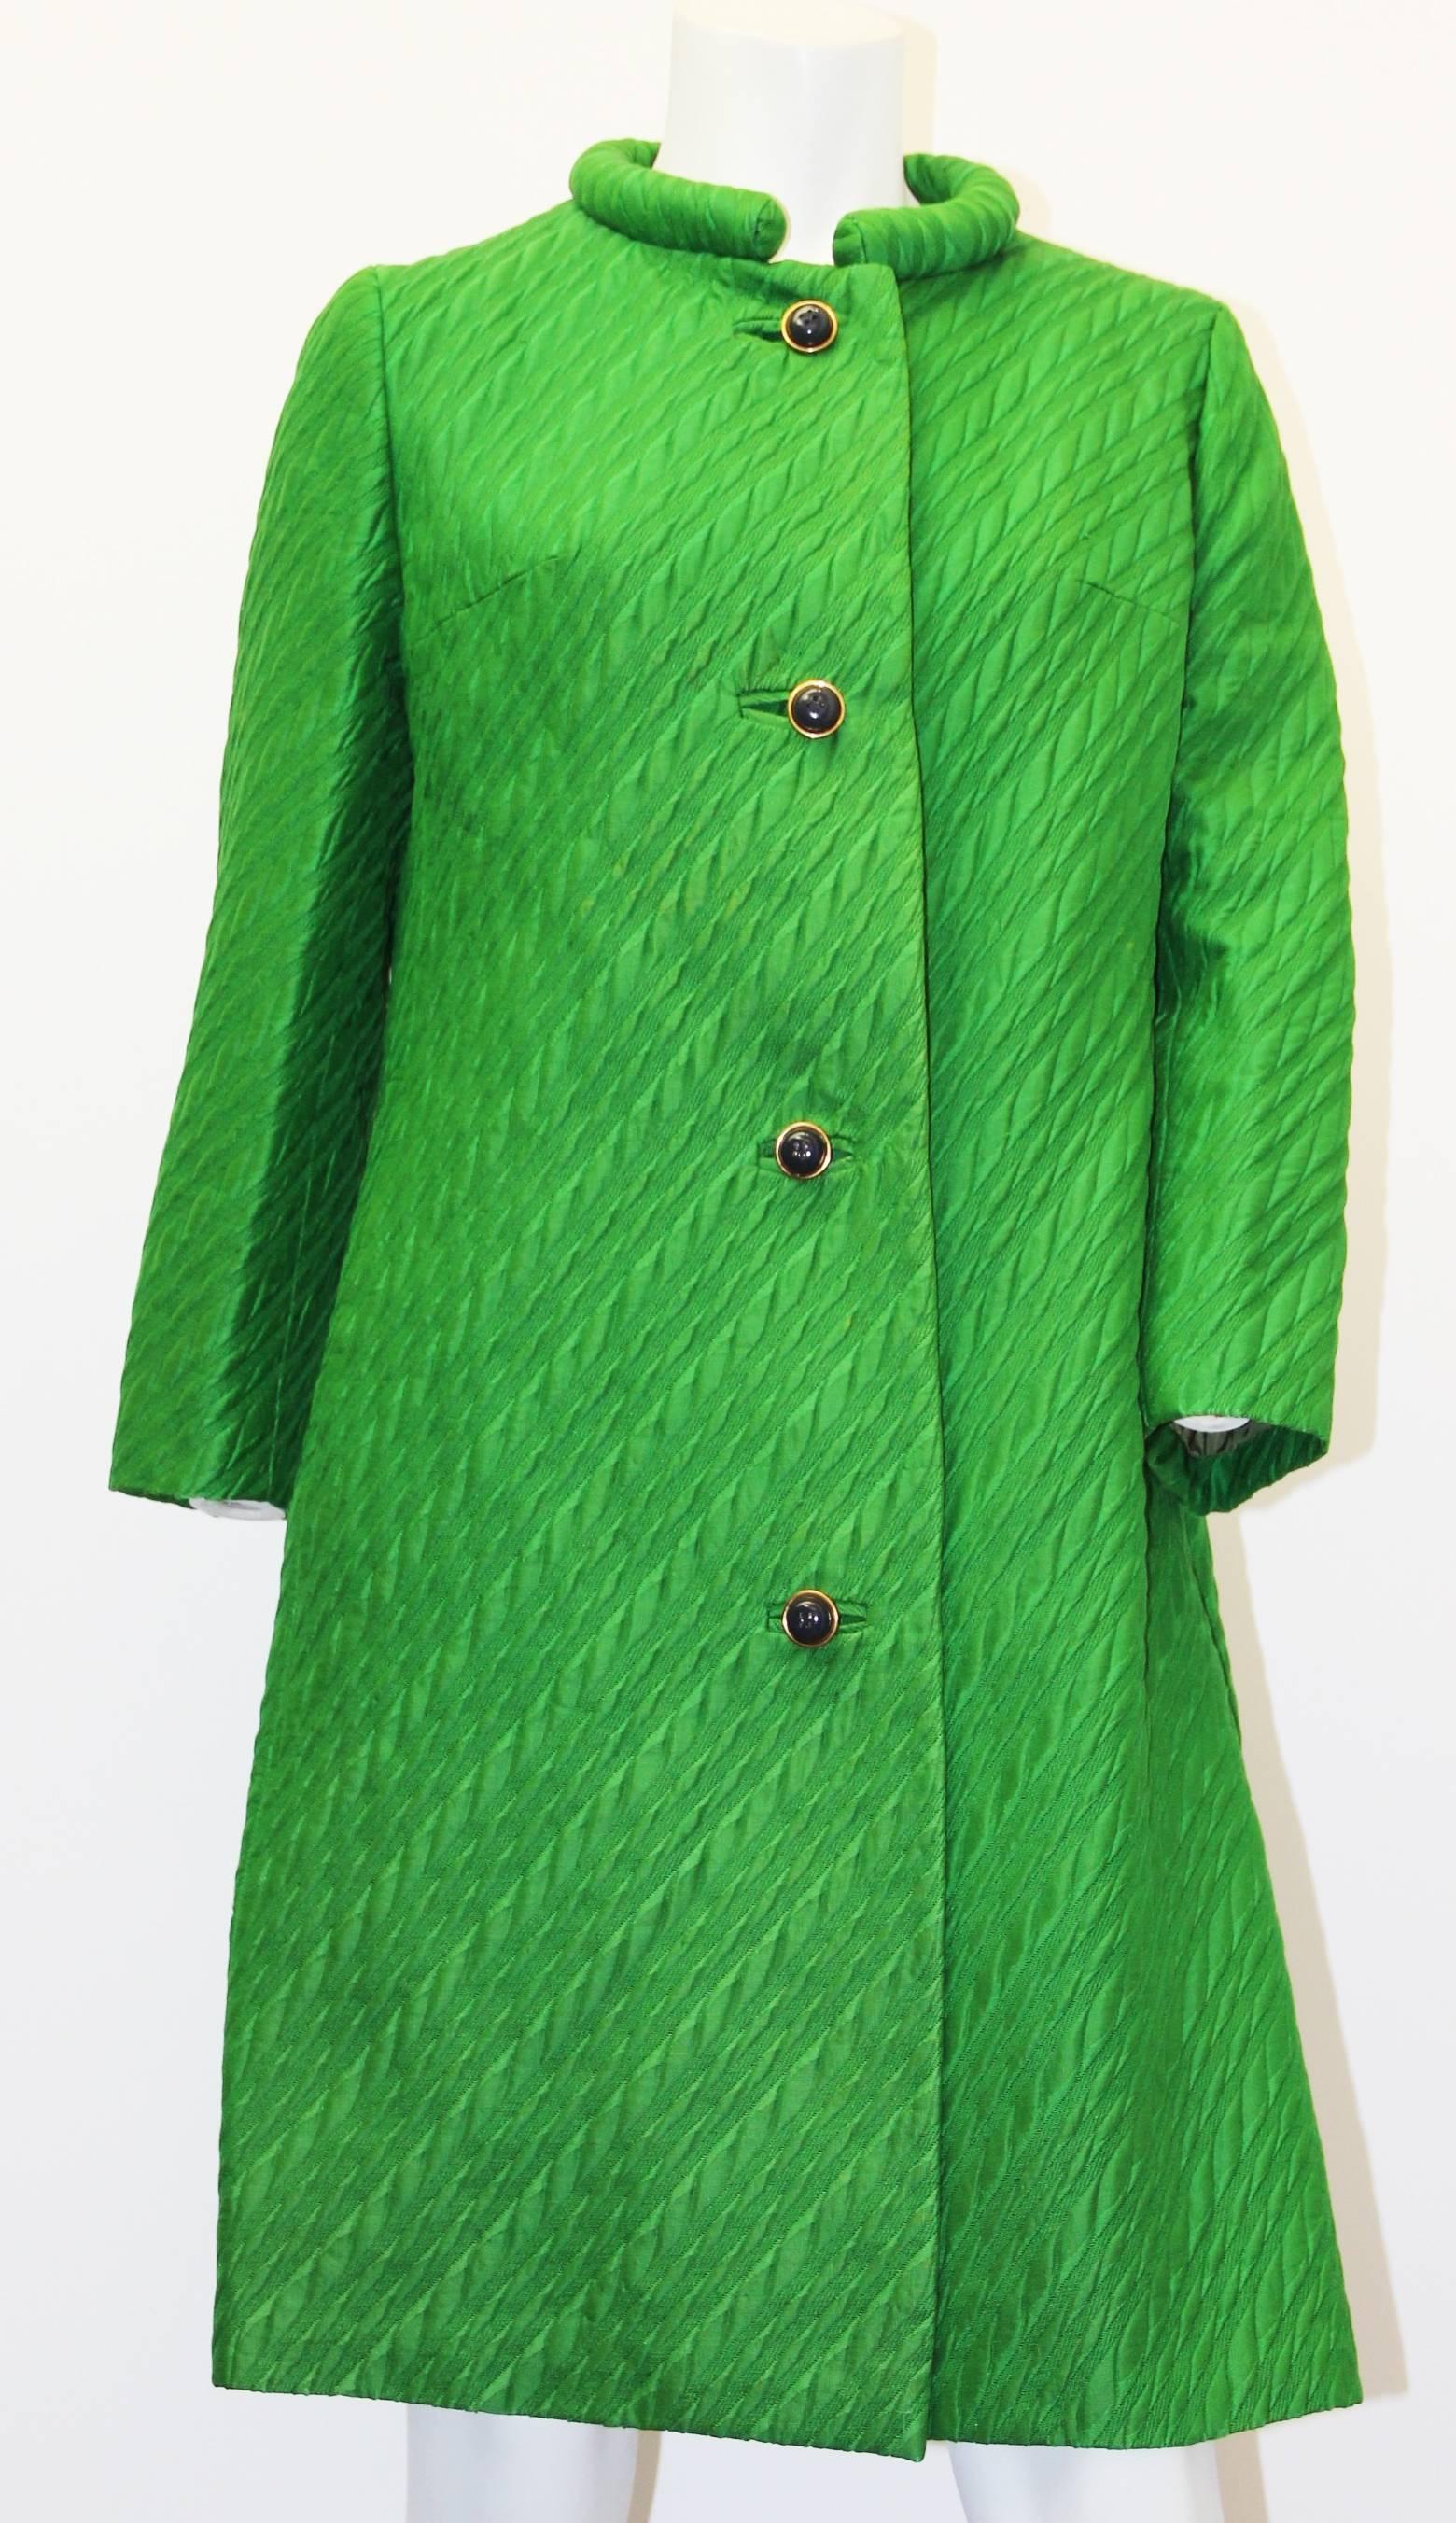 60s Irene Sargent brocade green coat, with navy buttons.